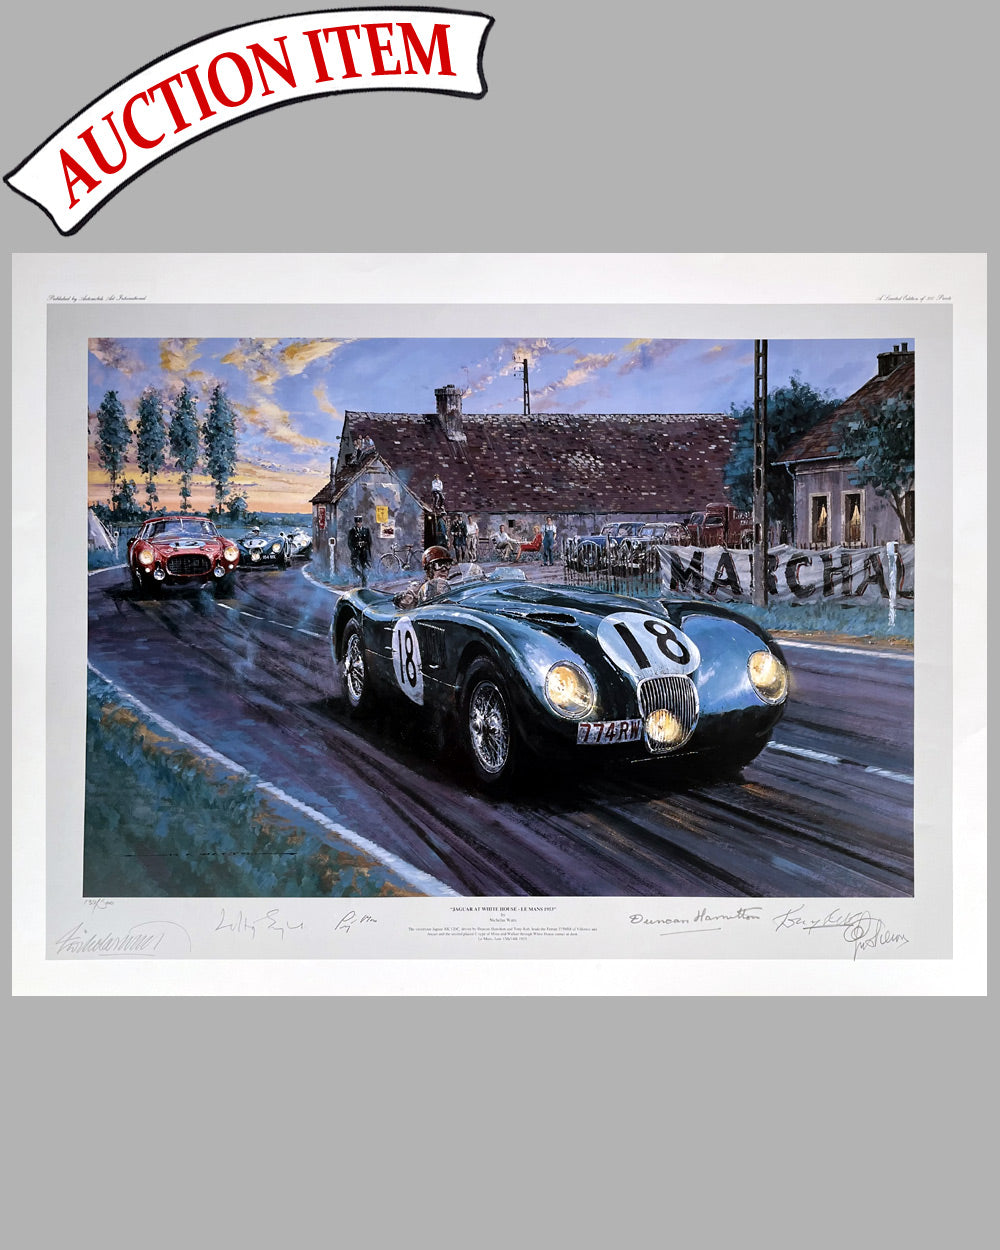 2 - Jaguar at White House Le Mans 1953 print by Nicholas Watts, autographed by 4 drivers and the team manager